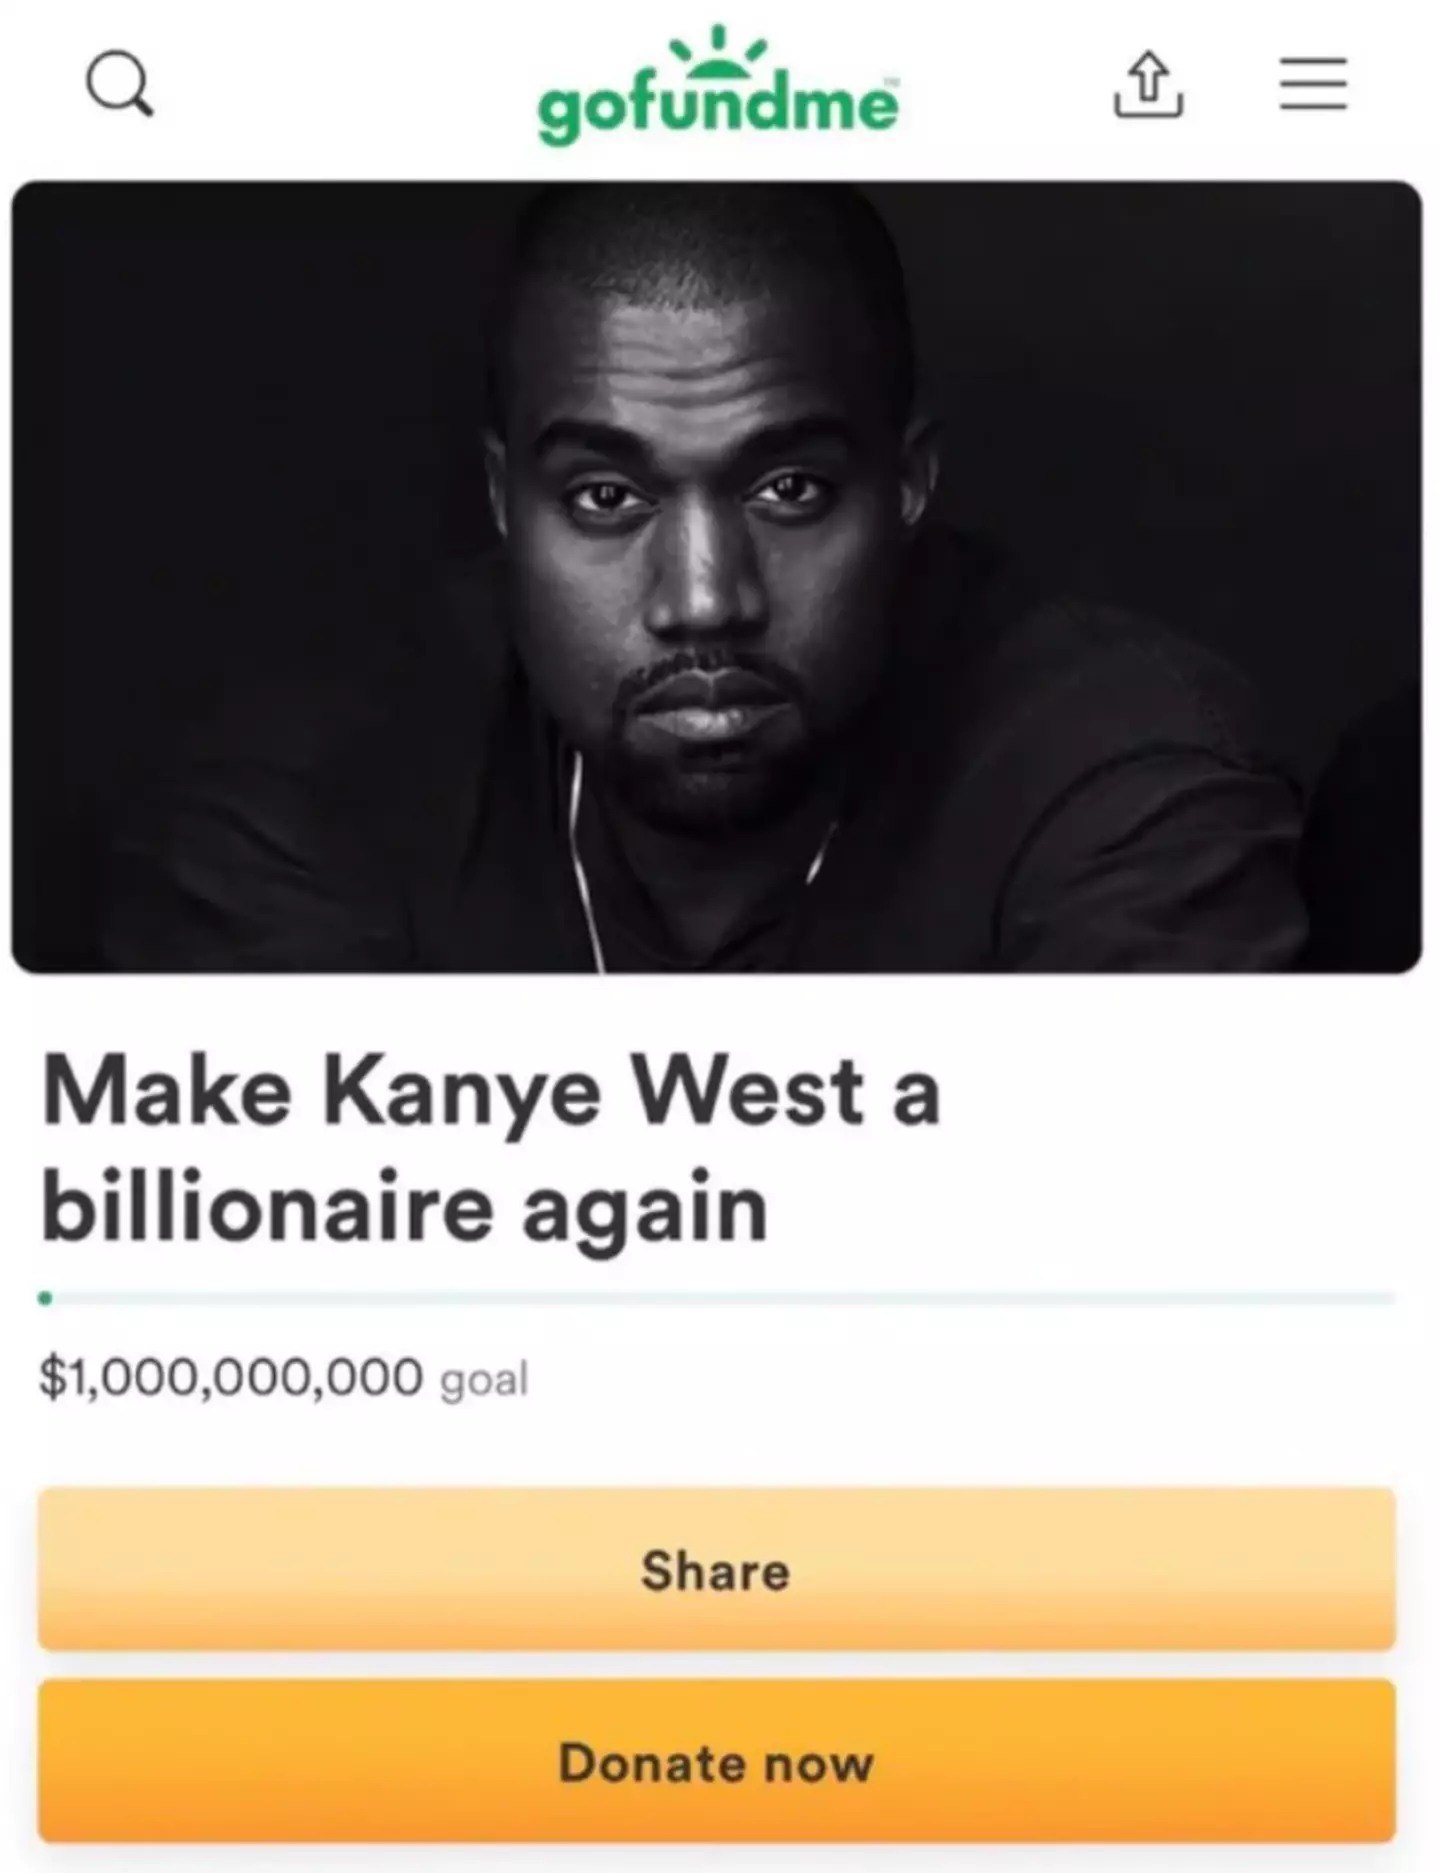 There are GoFundMe's being set up to get Kanye West back to billionaire status.